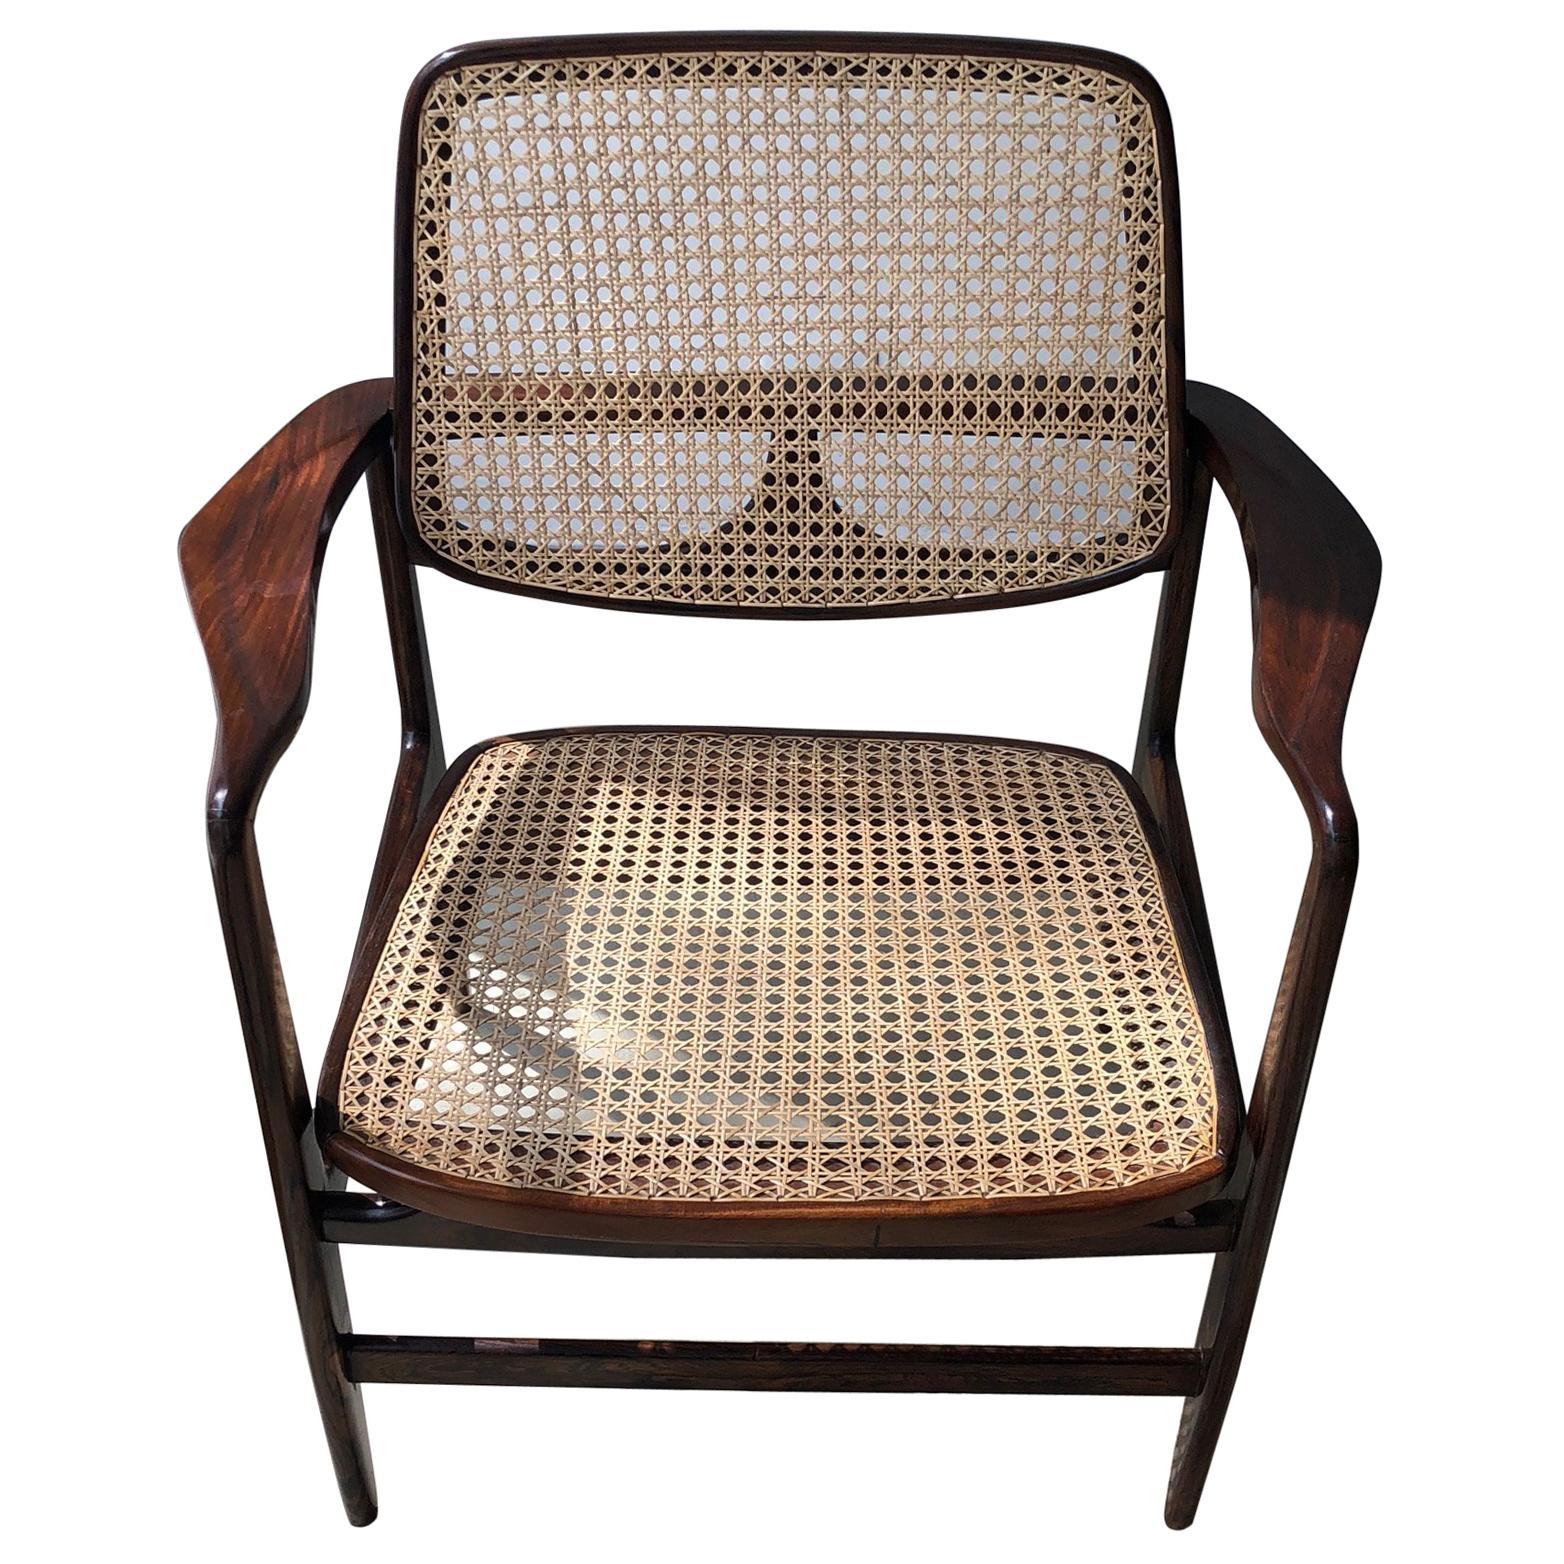 Sergio Rodrigues "Oscar" Armchair for OCA, Rosewood and Cane Chair, Single Item